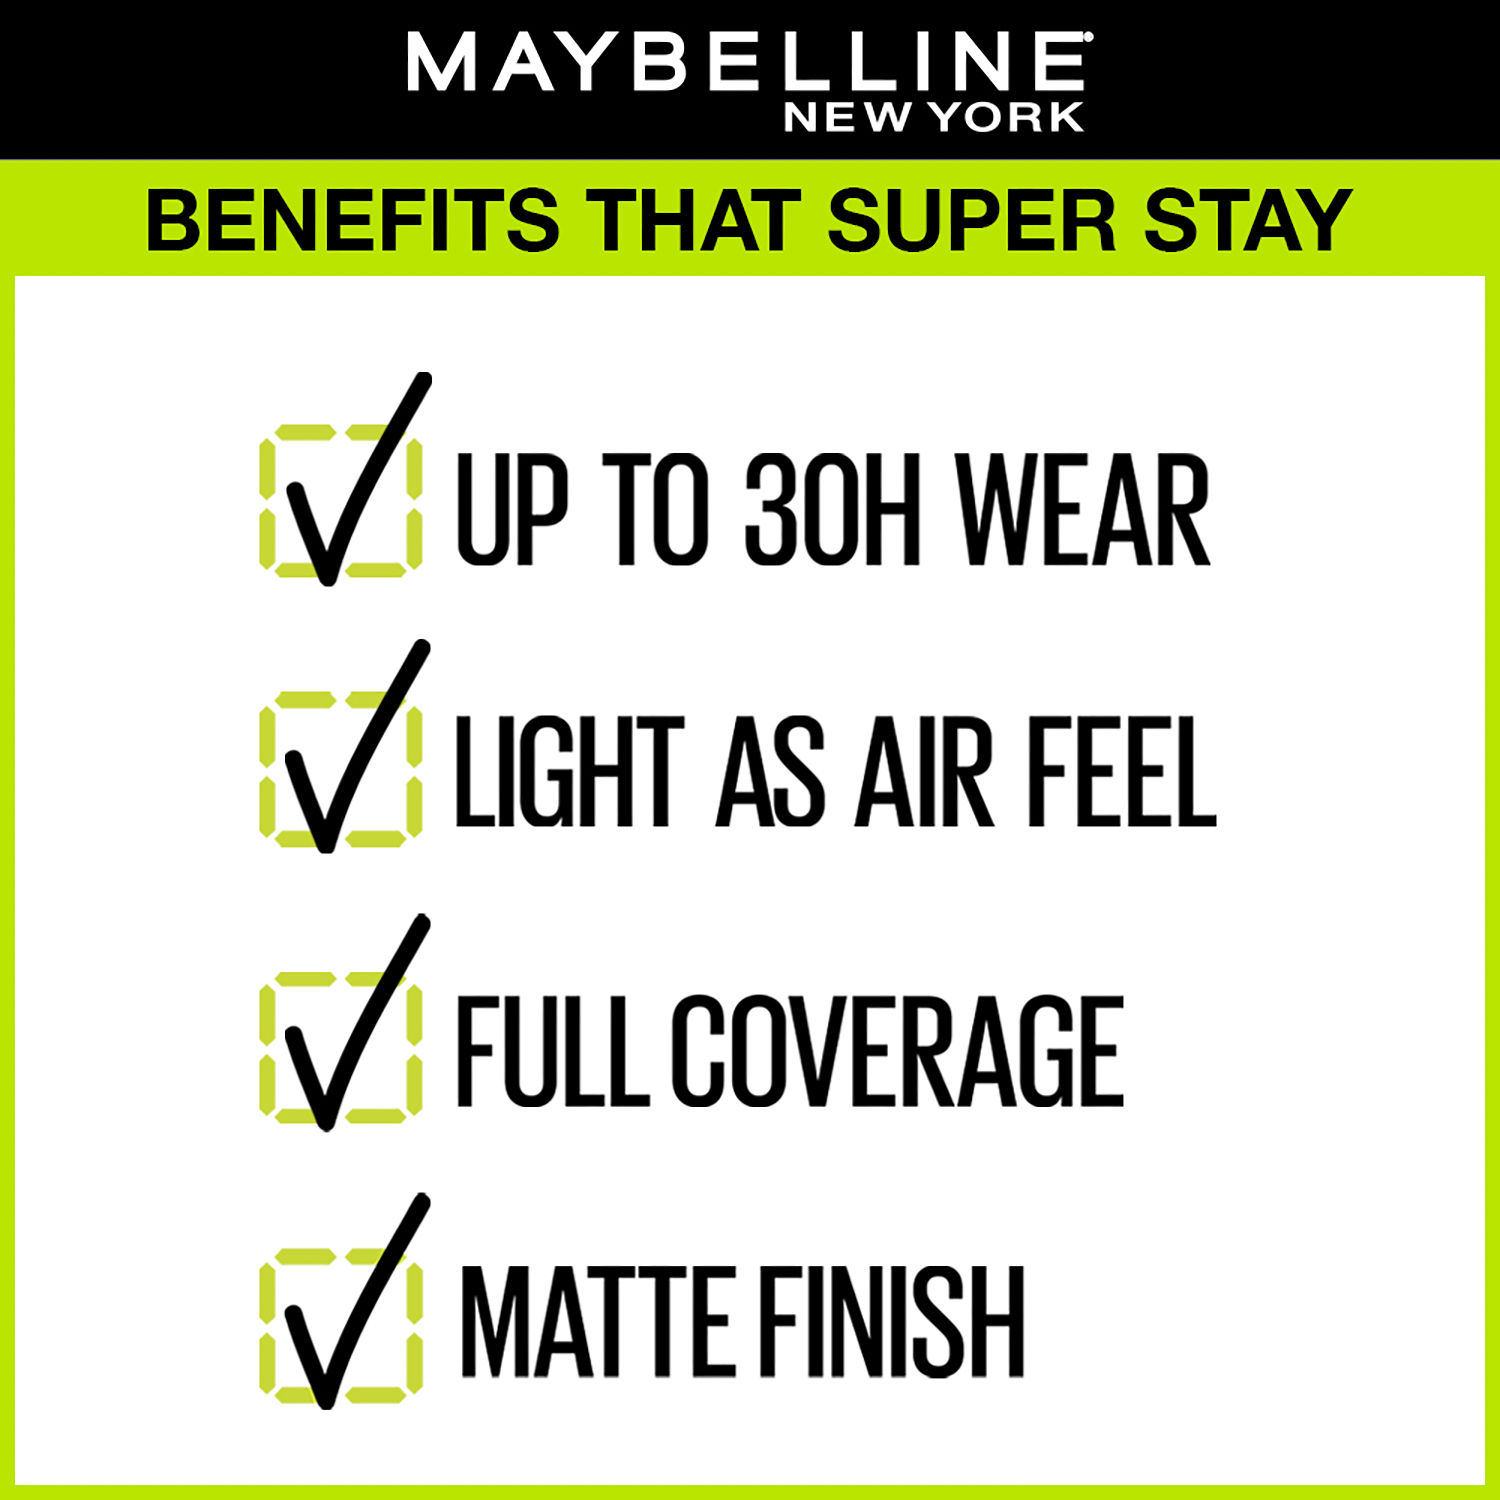 Maybelline New York Super 30ml , 112, Proof, Liquid Full 30 Wear Active with Natural Coverage Wear, Ivory, Stay Matte Finish Transfer Foundation HR